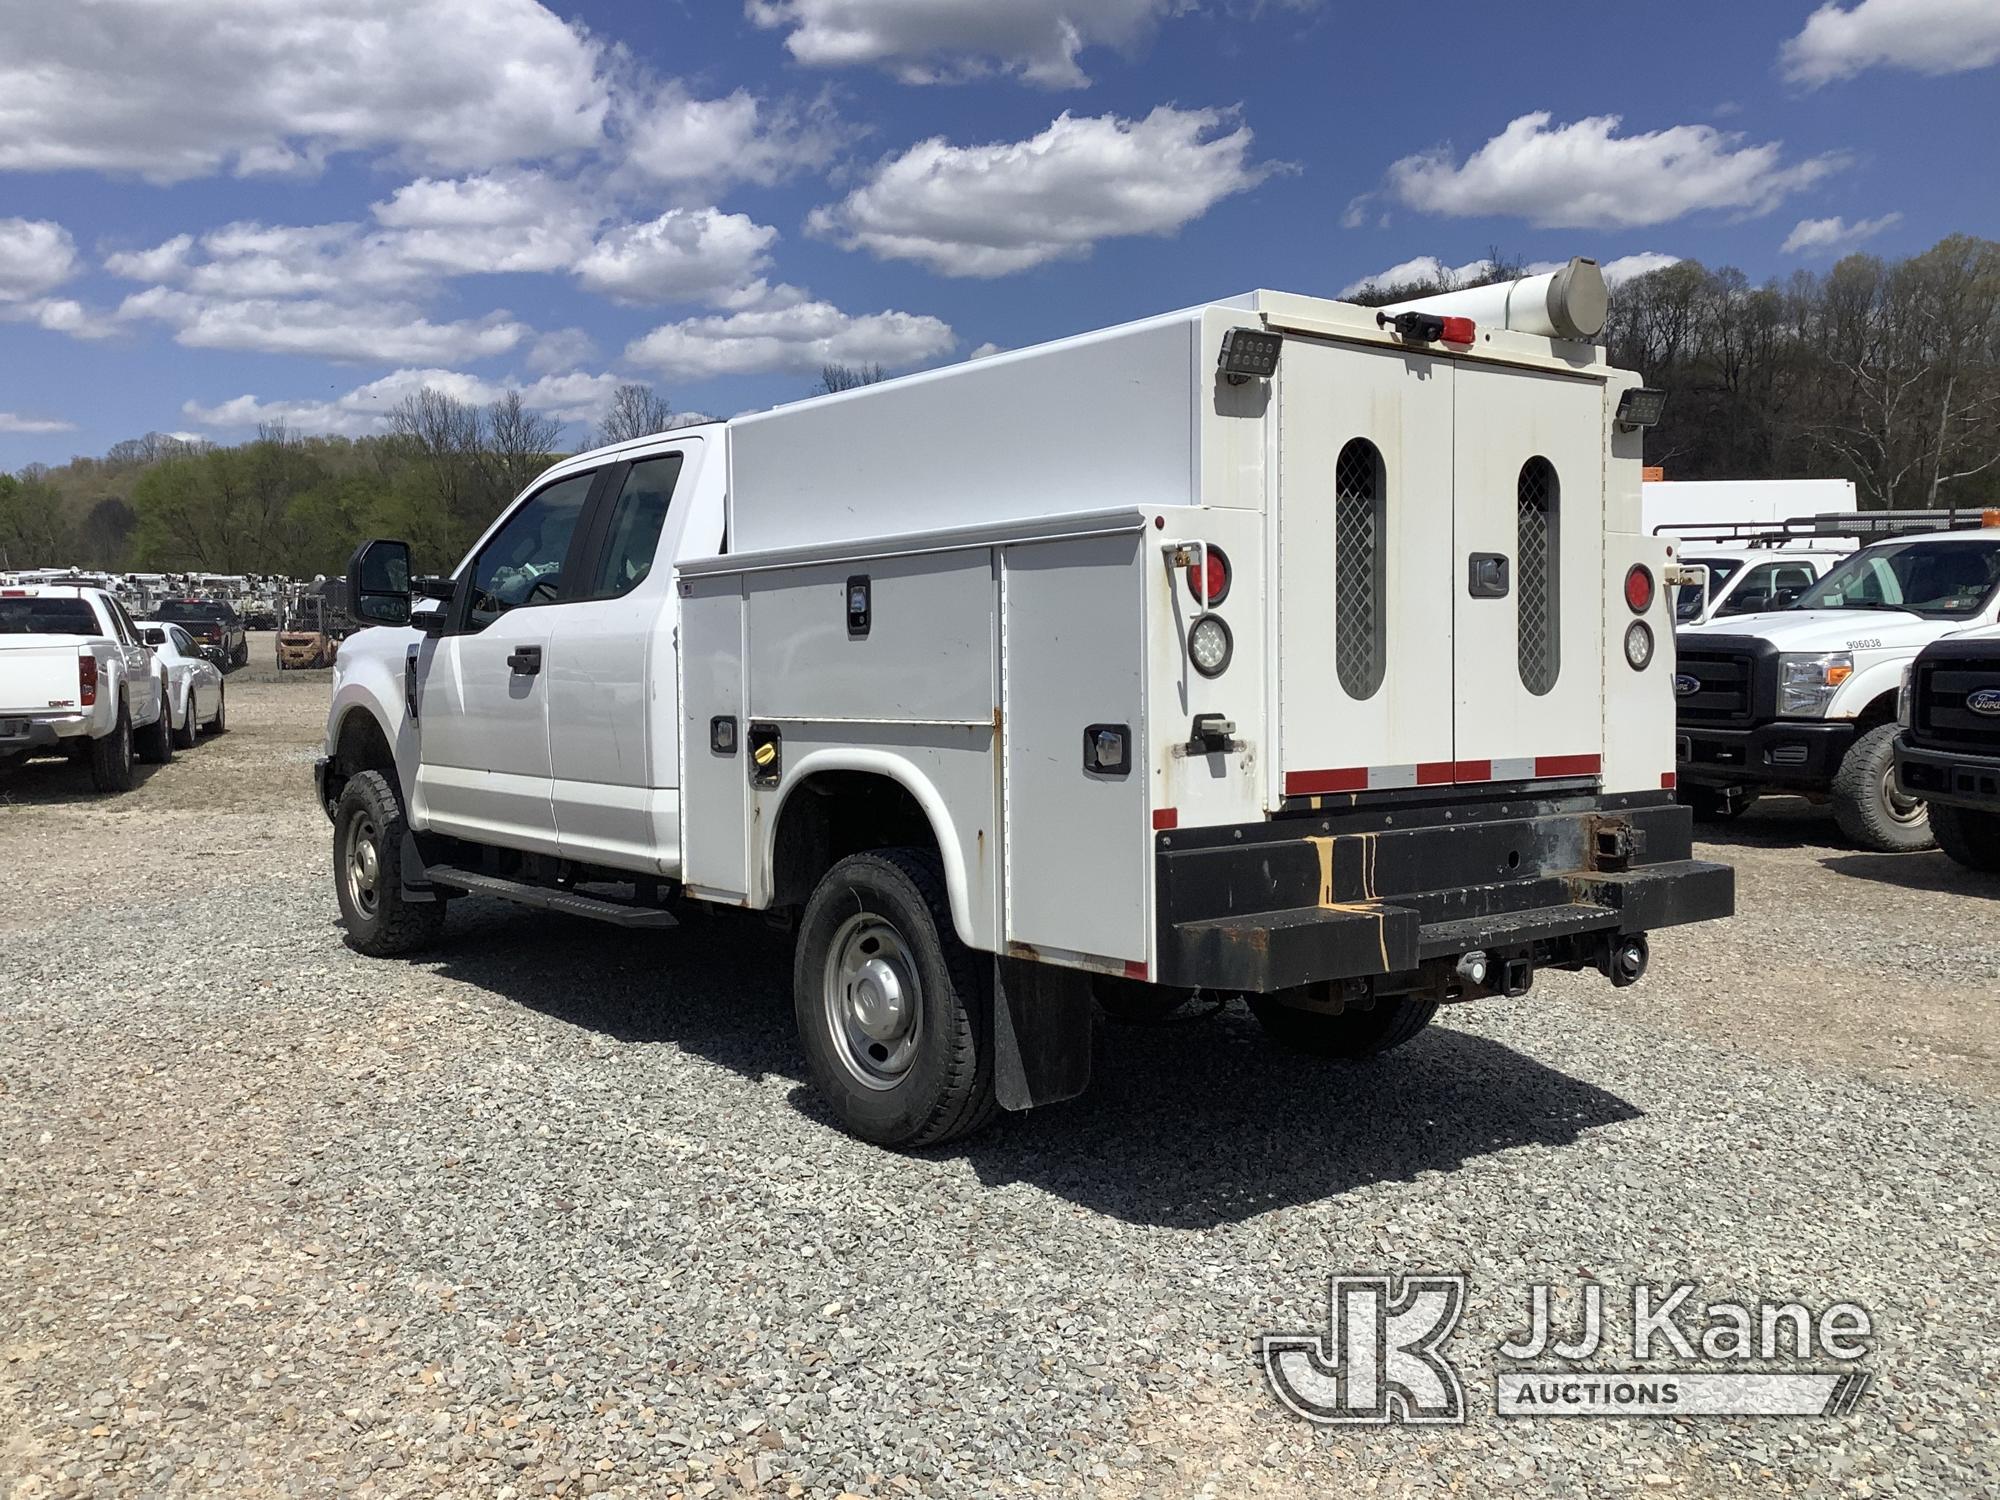 (Smock, PA) 2017 Ford F250 4x4 Extended-Cab Enclosed Service Truck Runs & Moves, Engine Noise, Drive